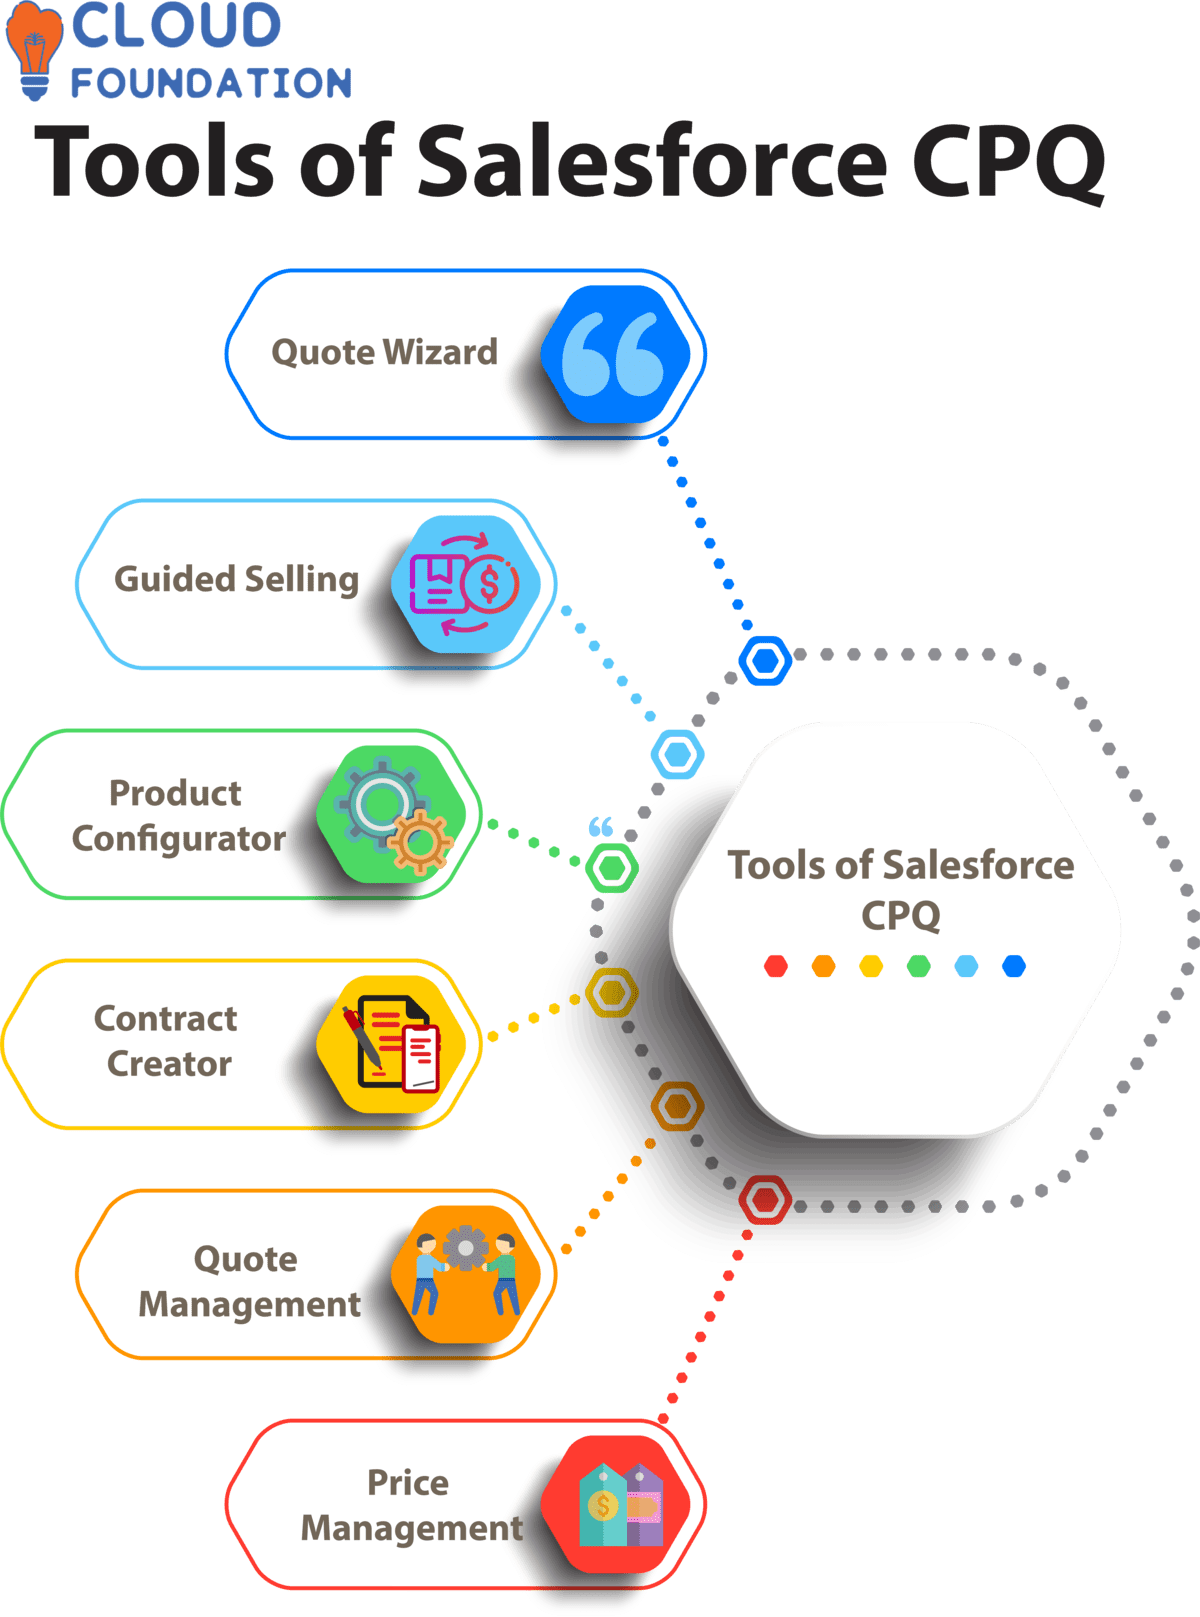 What is Salesforce CPQ? CloudFoundation Blog